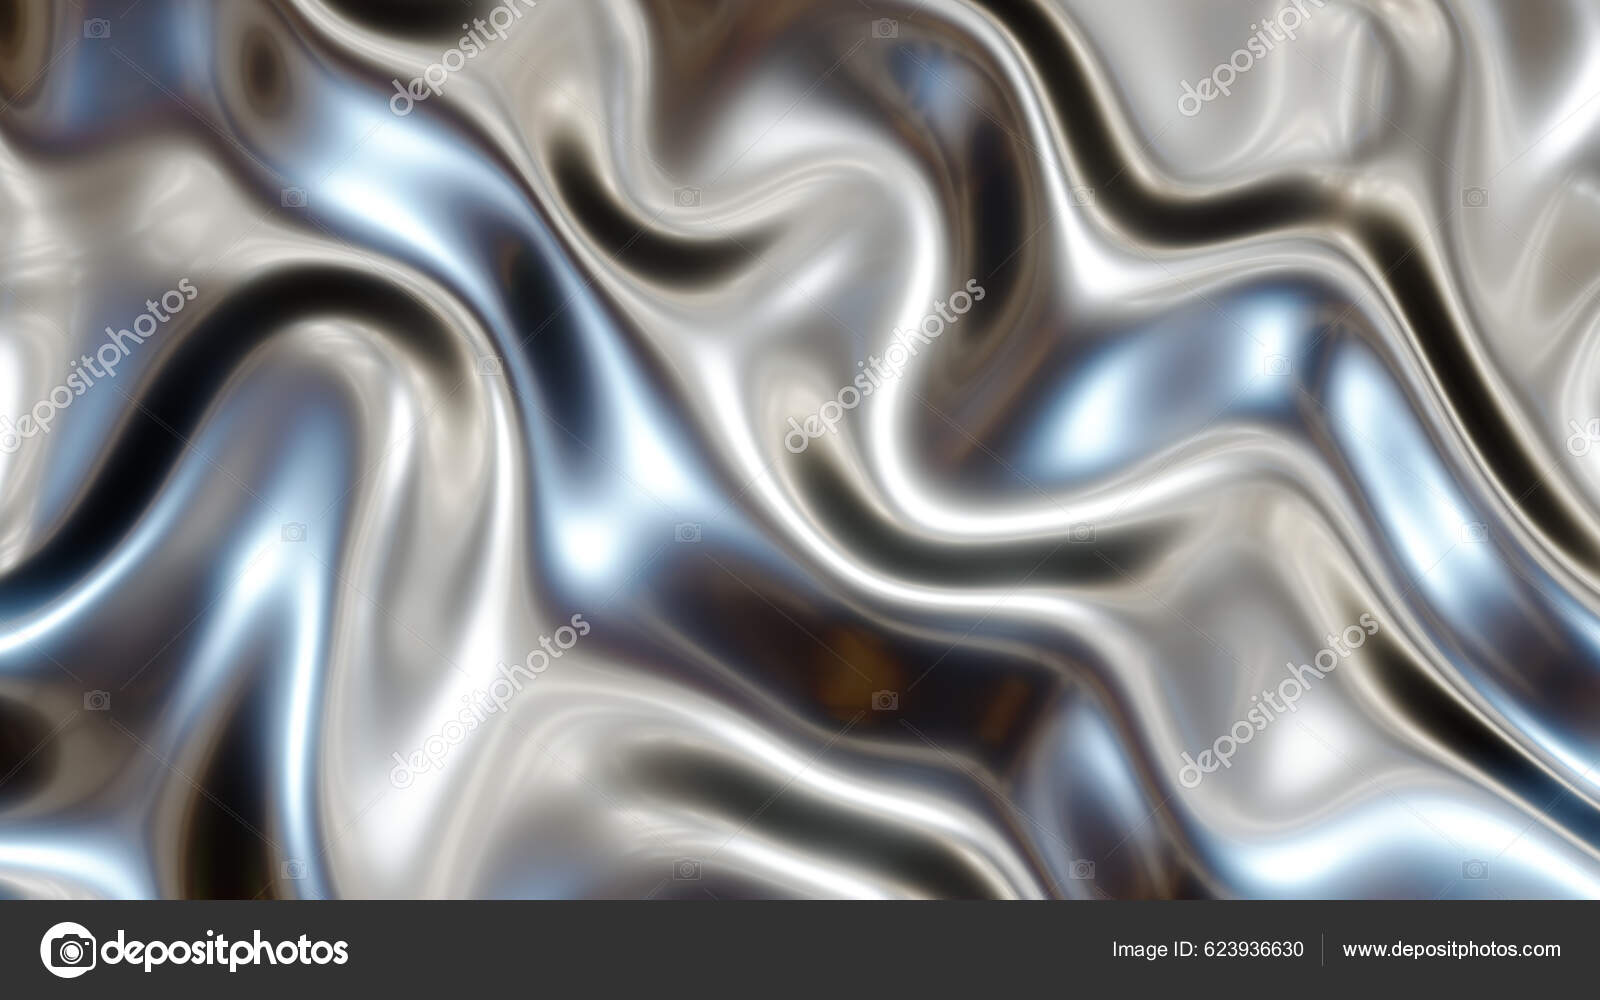 3d abstract background, rippled liquid chrome metal Stock